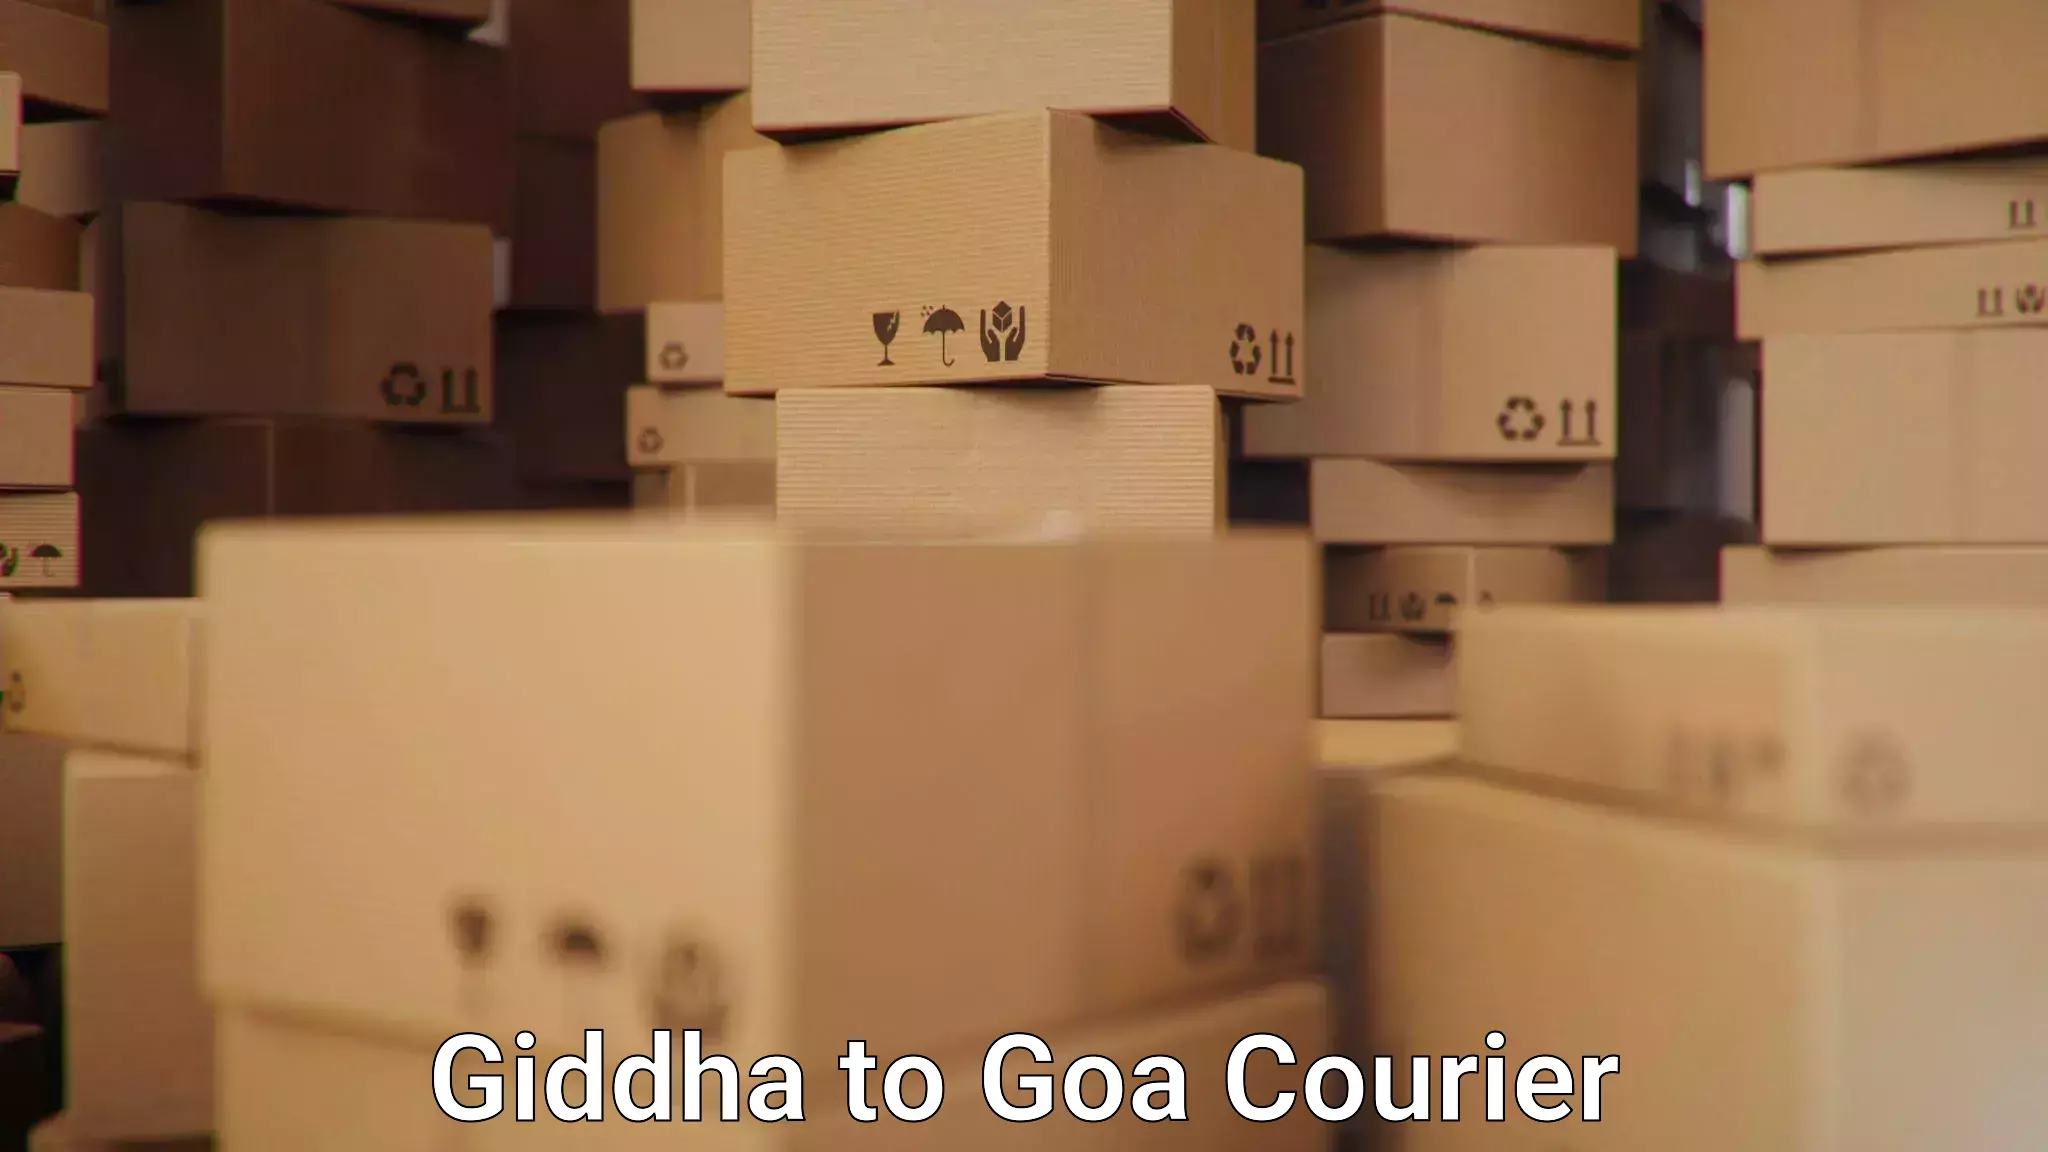 24/7 courier service in Giddha to Goa